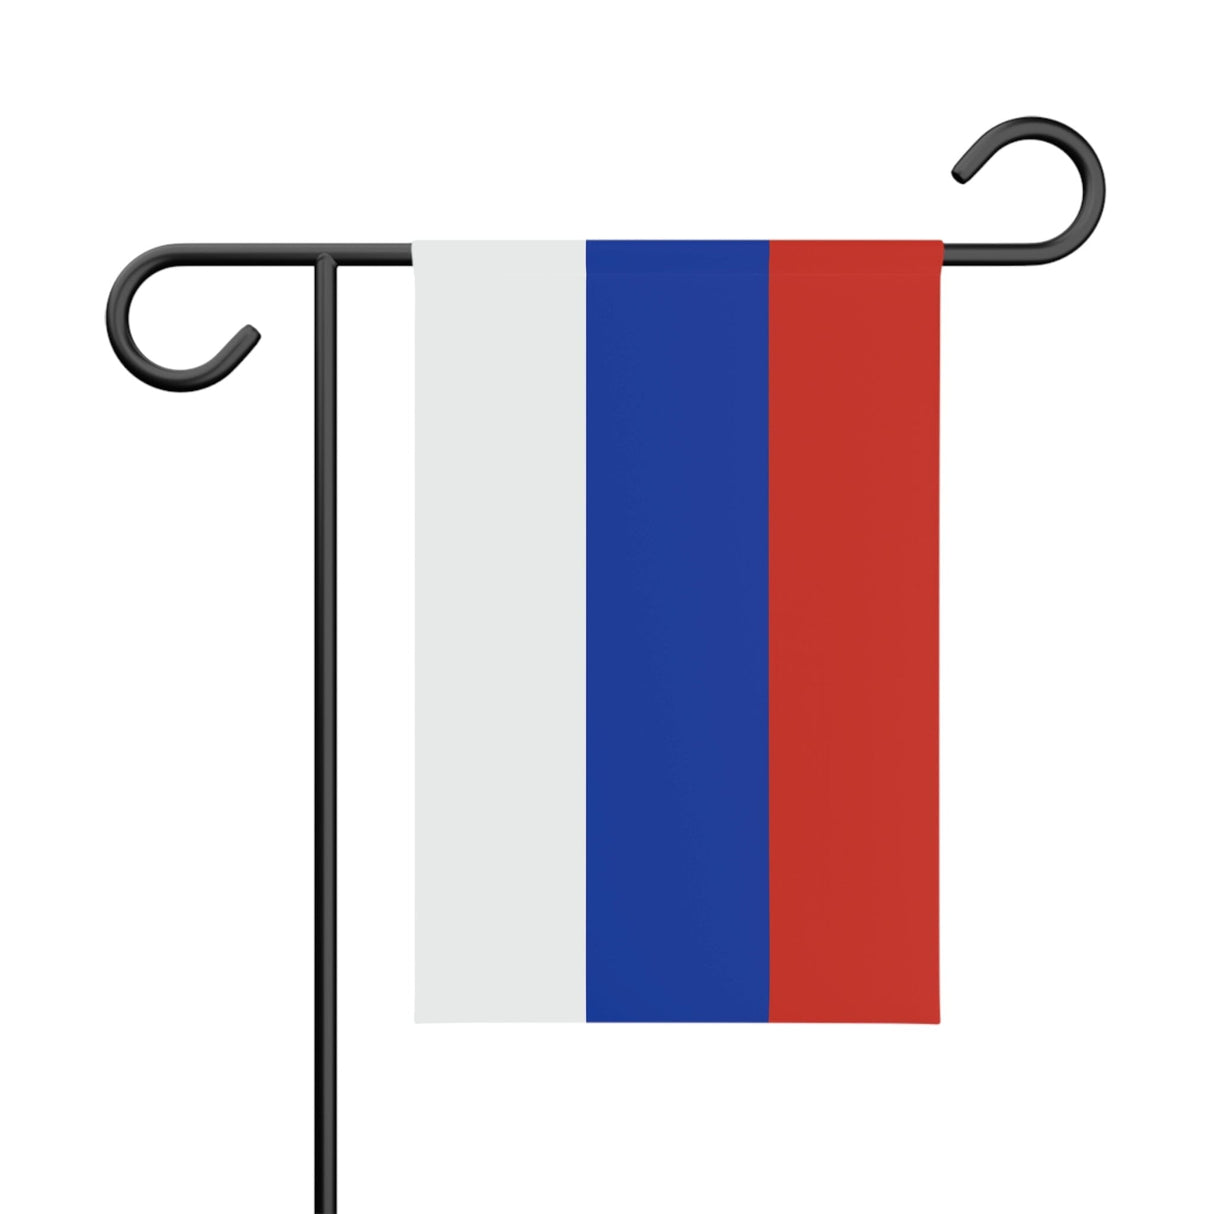 Garden Flag of Russia 100% Polyester Double-Sided Print - Pixelforma